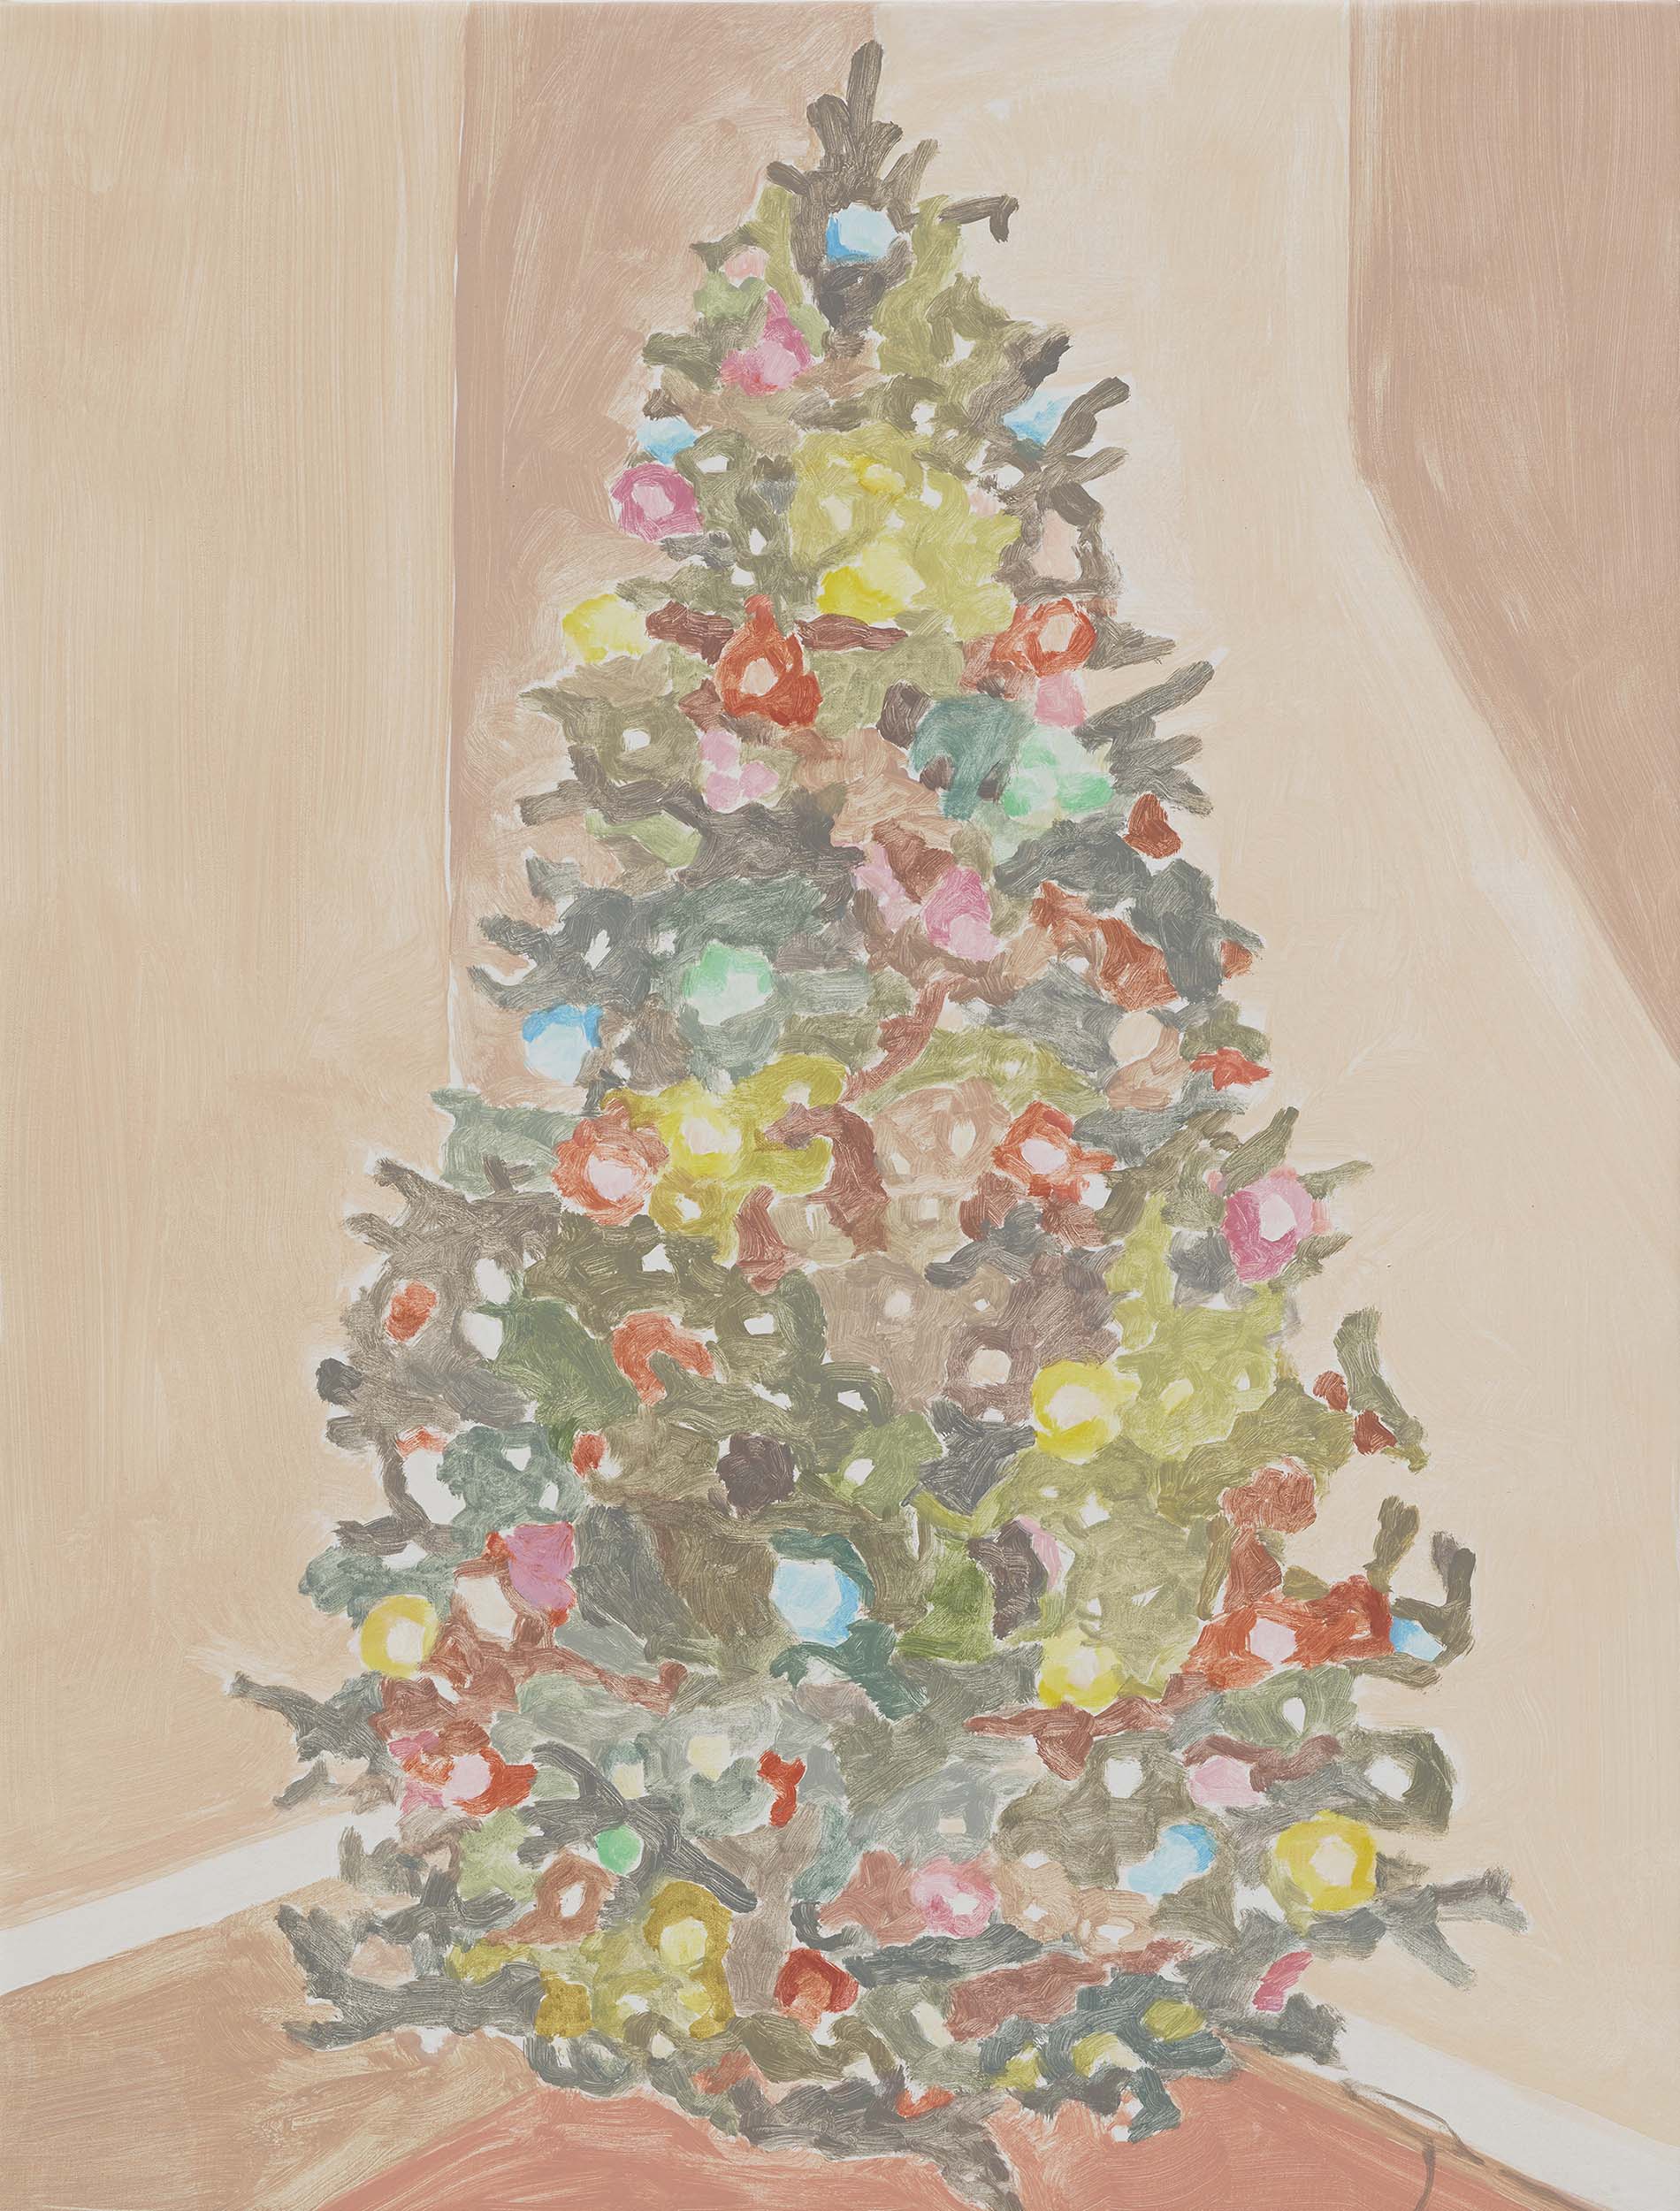  Xmas Tree (colored lights), acrylic on canvas, 32 x 24.25 inches, 2015. 